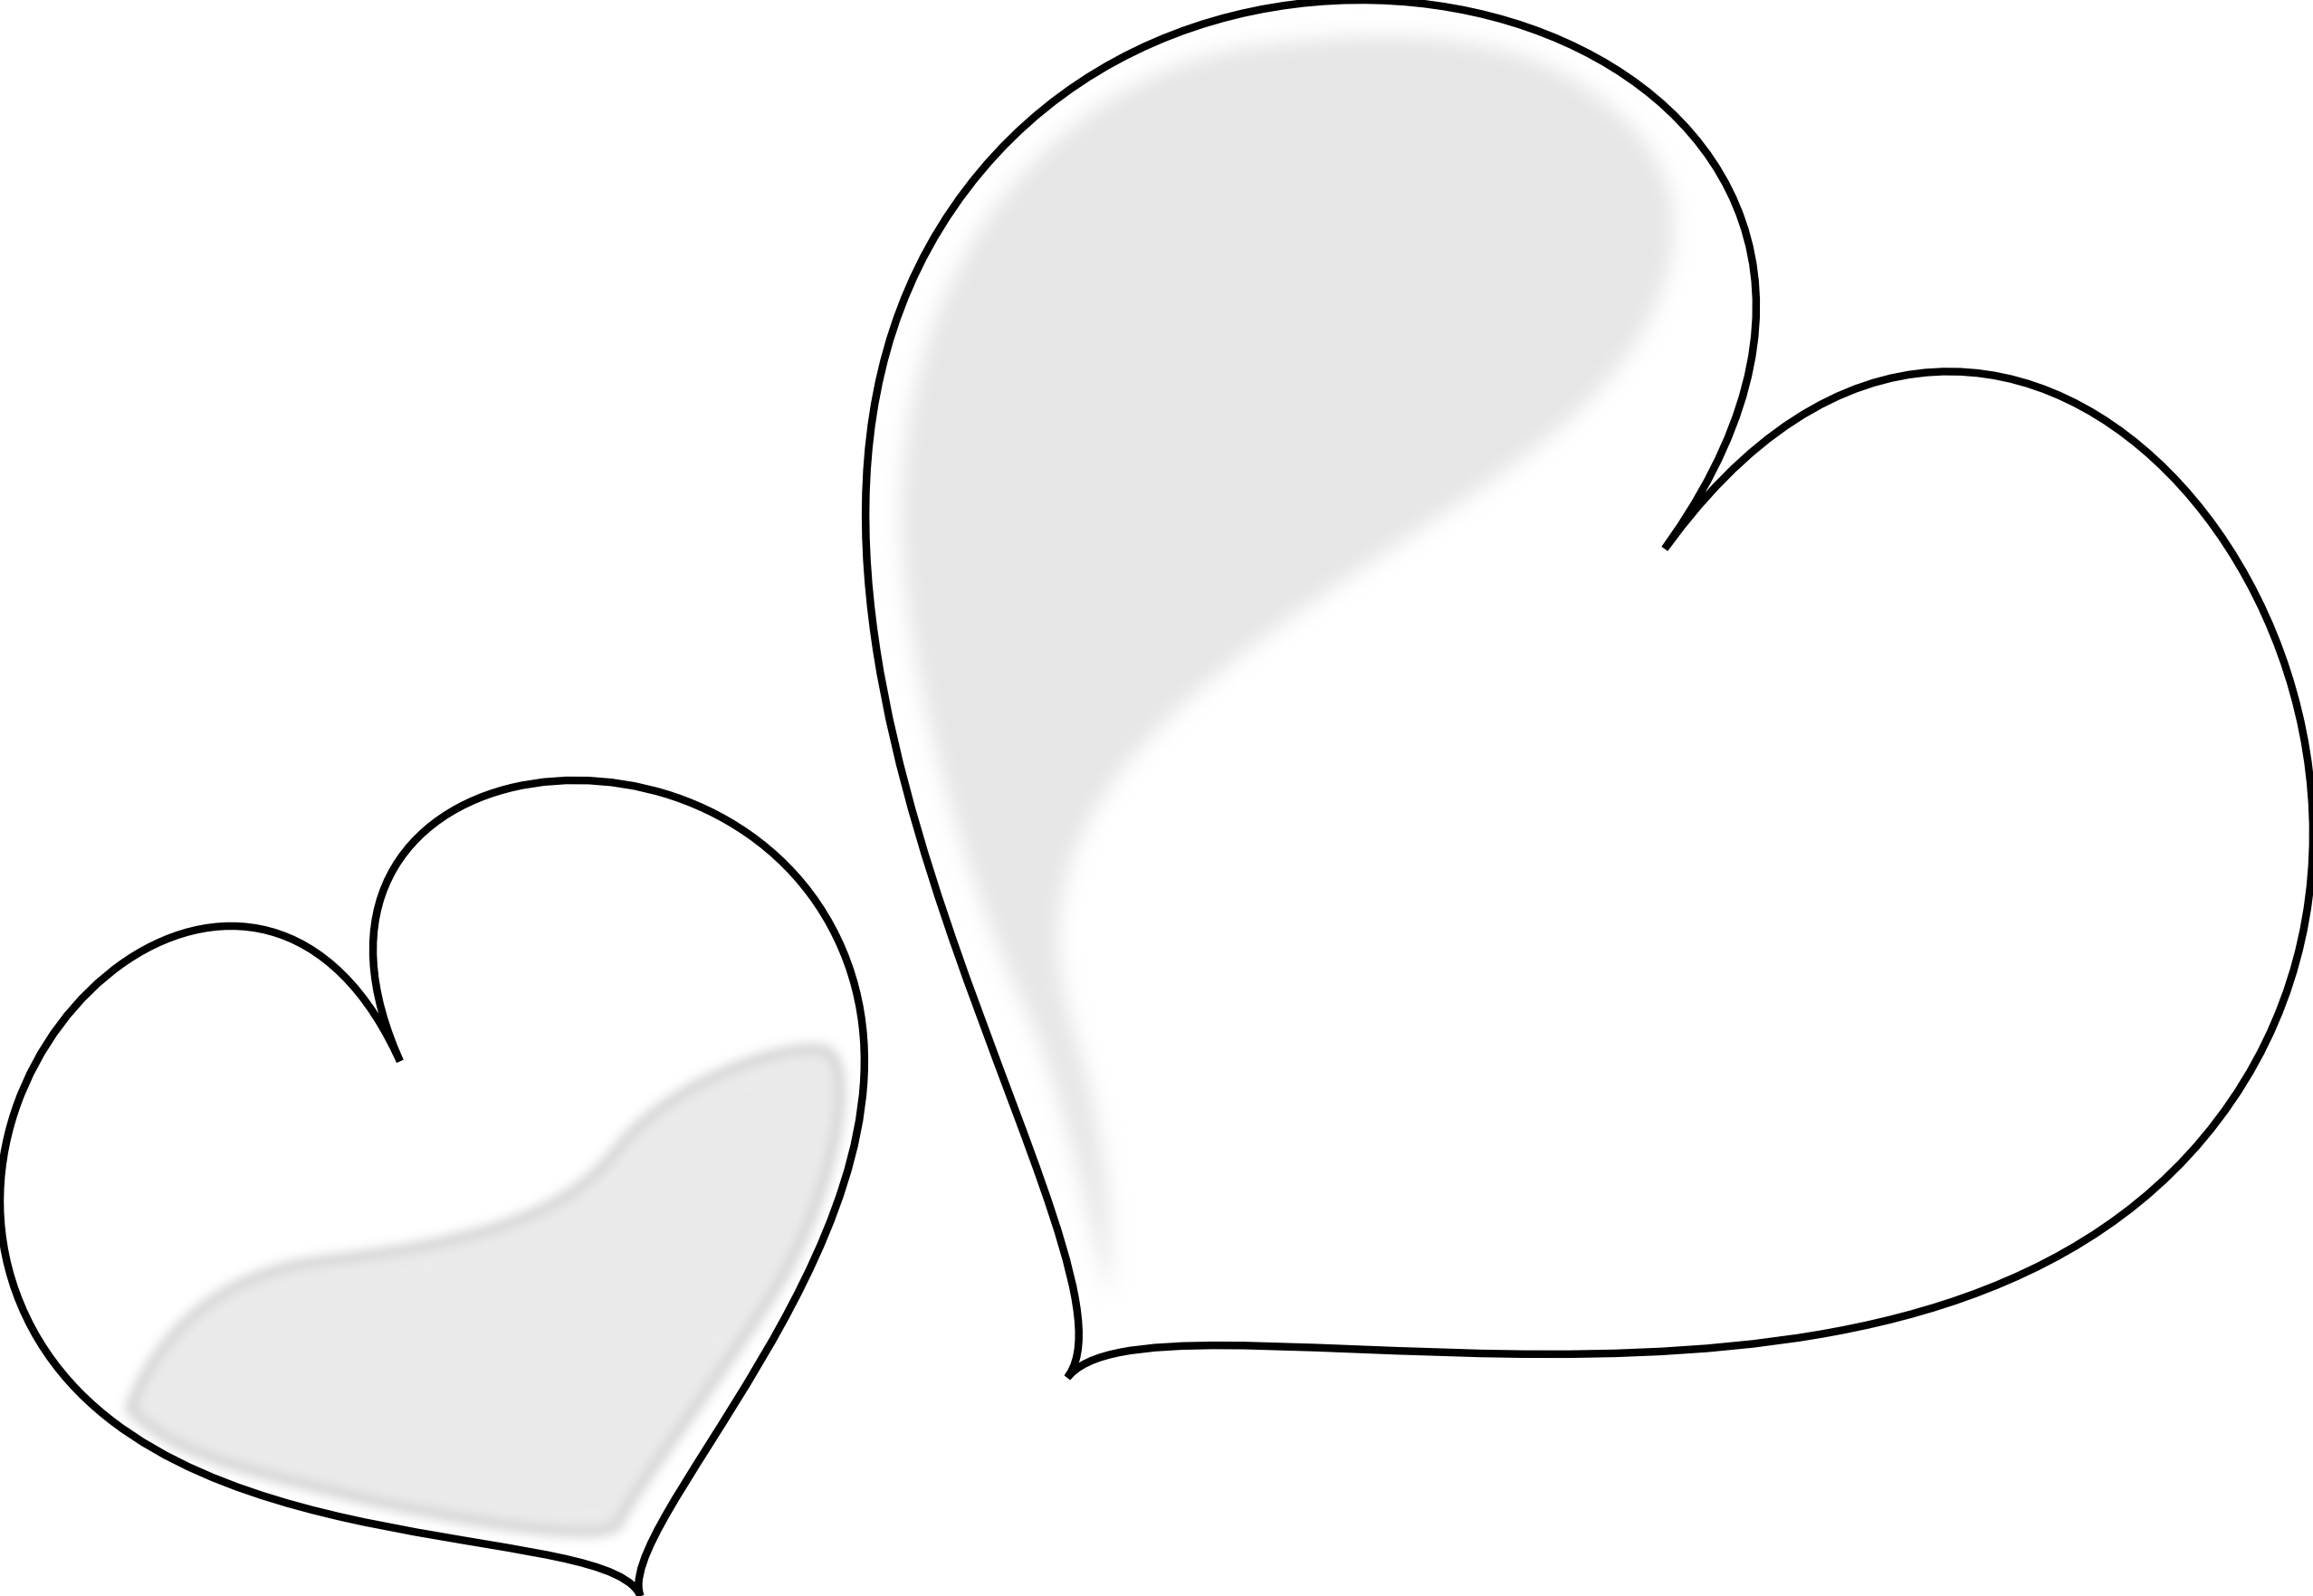 free clipart of hearts in black and white - photo #43